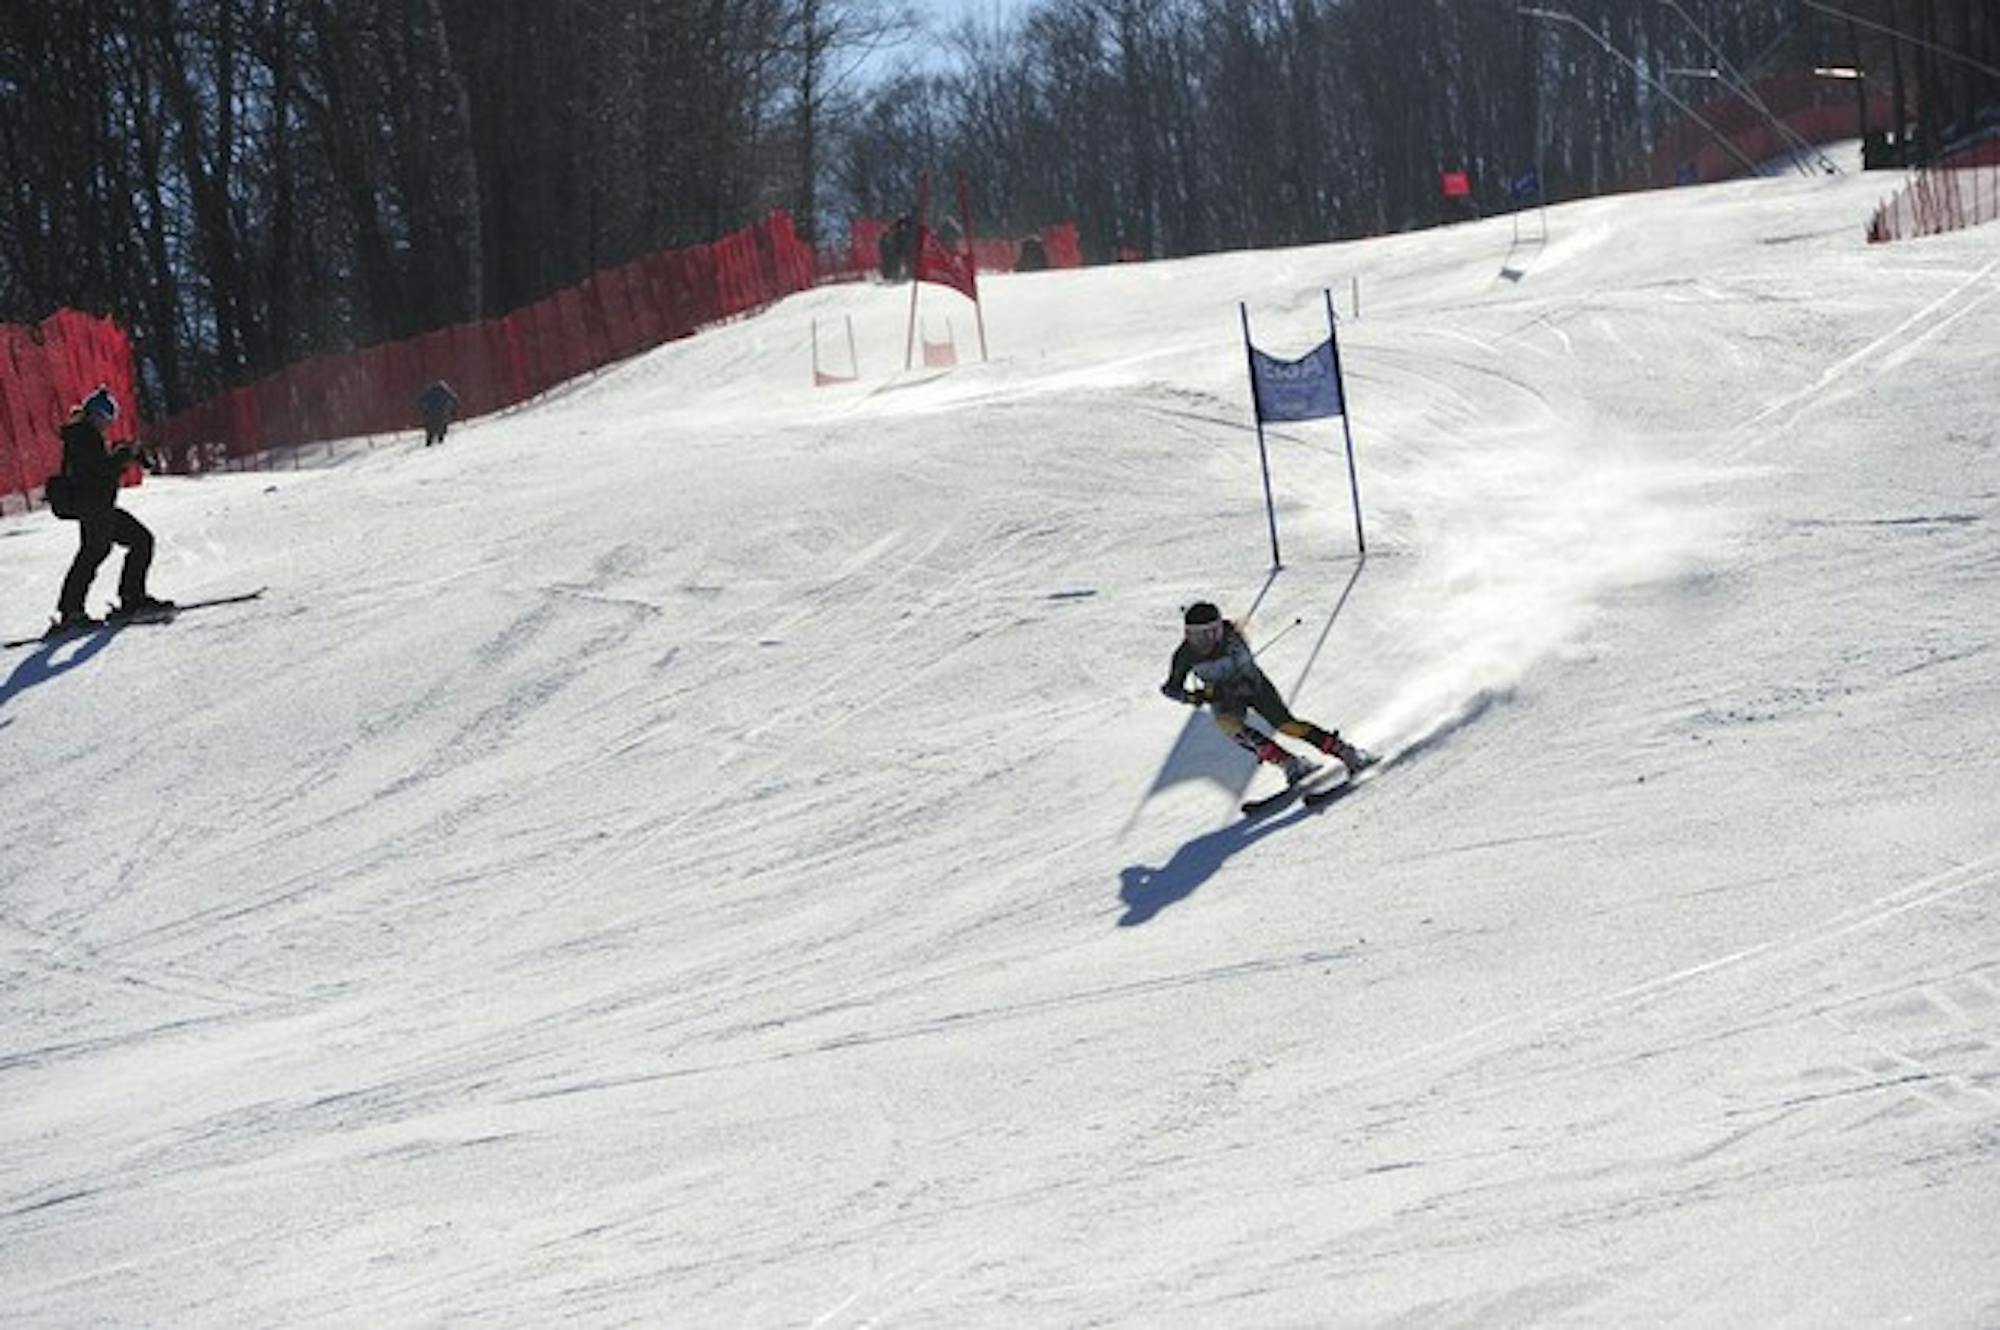 Compared to the Nordic teams, Dartmouth's alpine ski teams have been relatively unaffected by the winter's warm weather.